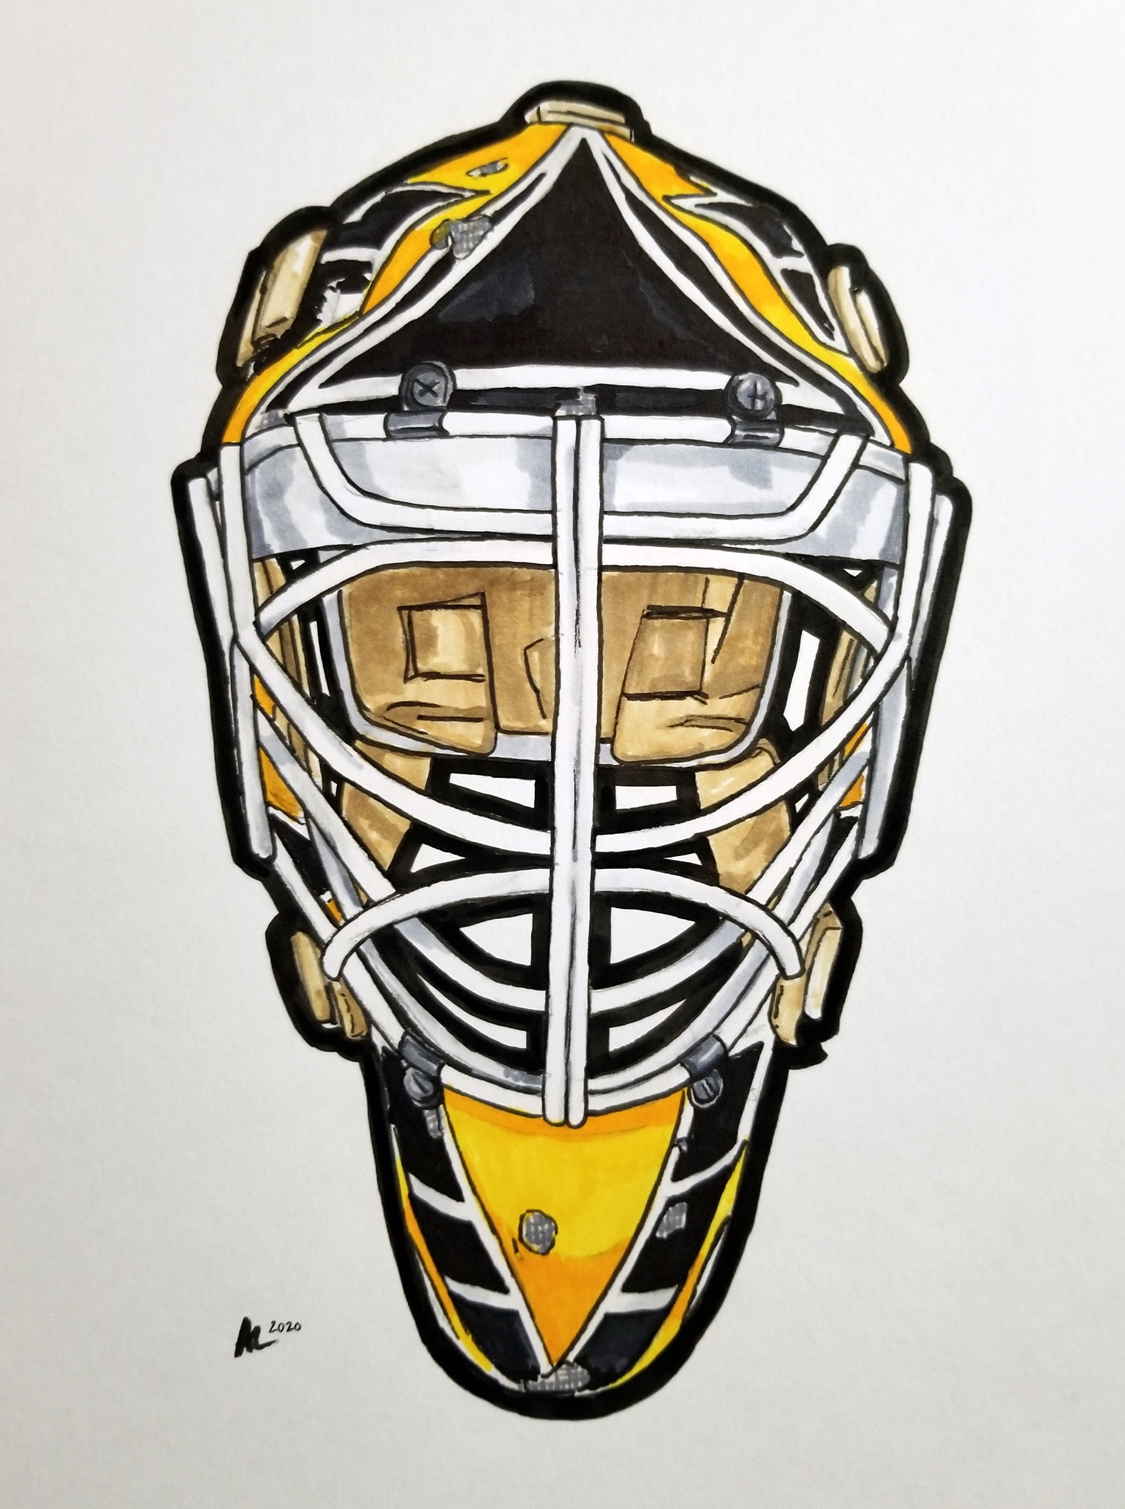 Pen and ink drawing of a goalie mask with cage and black and yellow highlights.